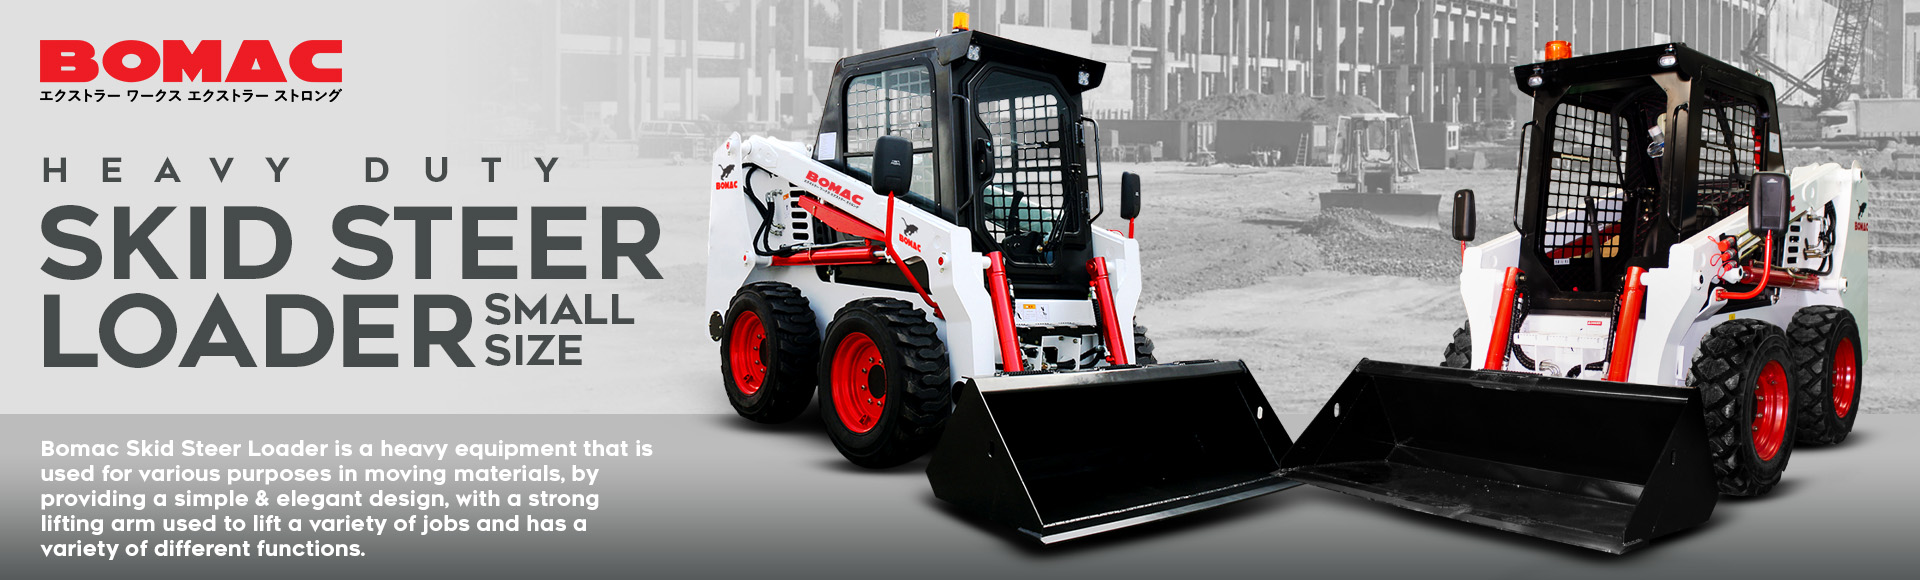 Banner Bomac Skid Steer Loader Small Sized